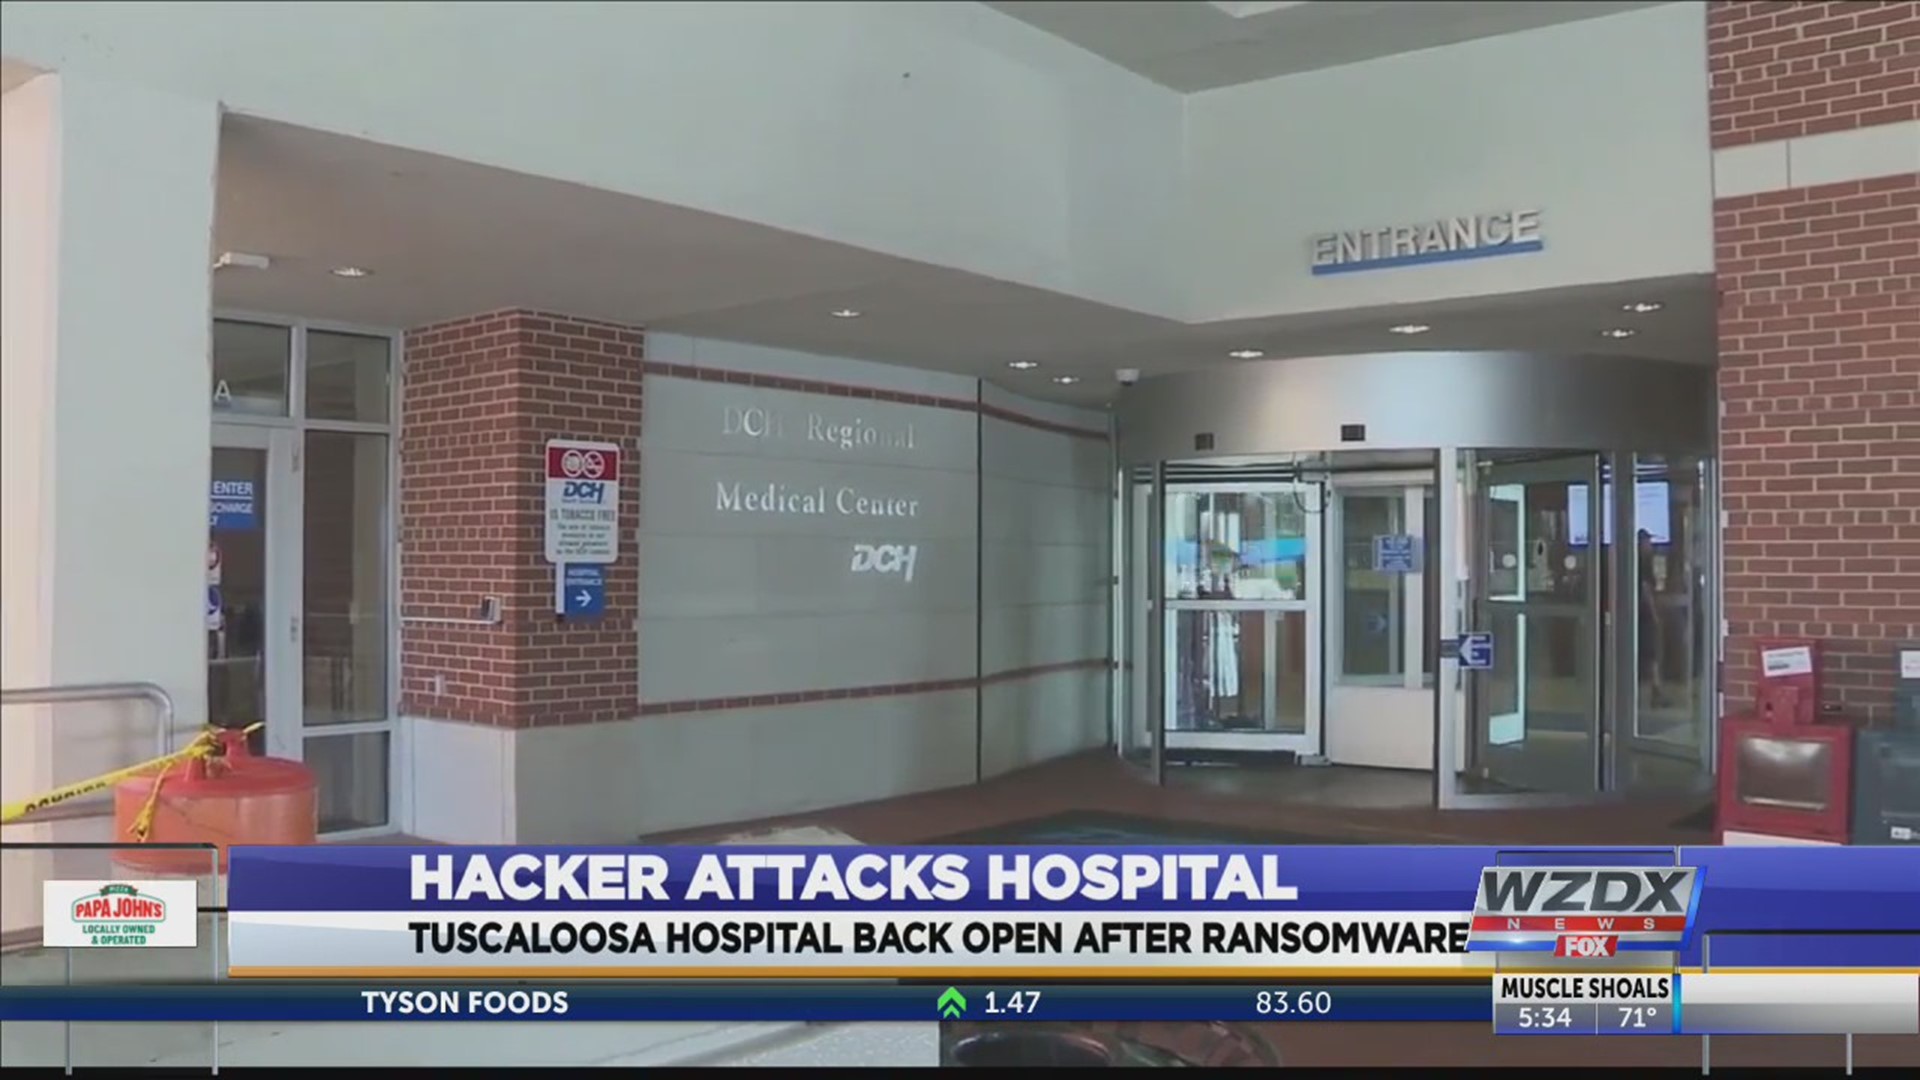 An Alabama hospital chain that quit accepting new patients after a malware attack crippled computer systems said it has resumed normal operations after paying a ransom demand.